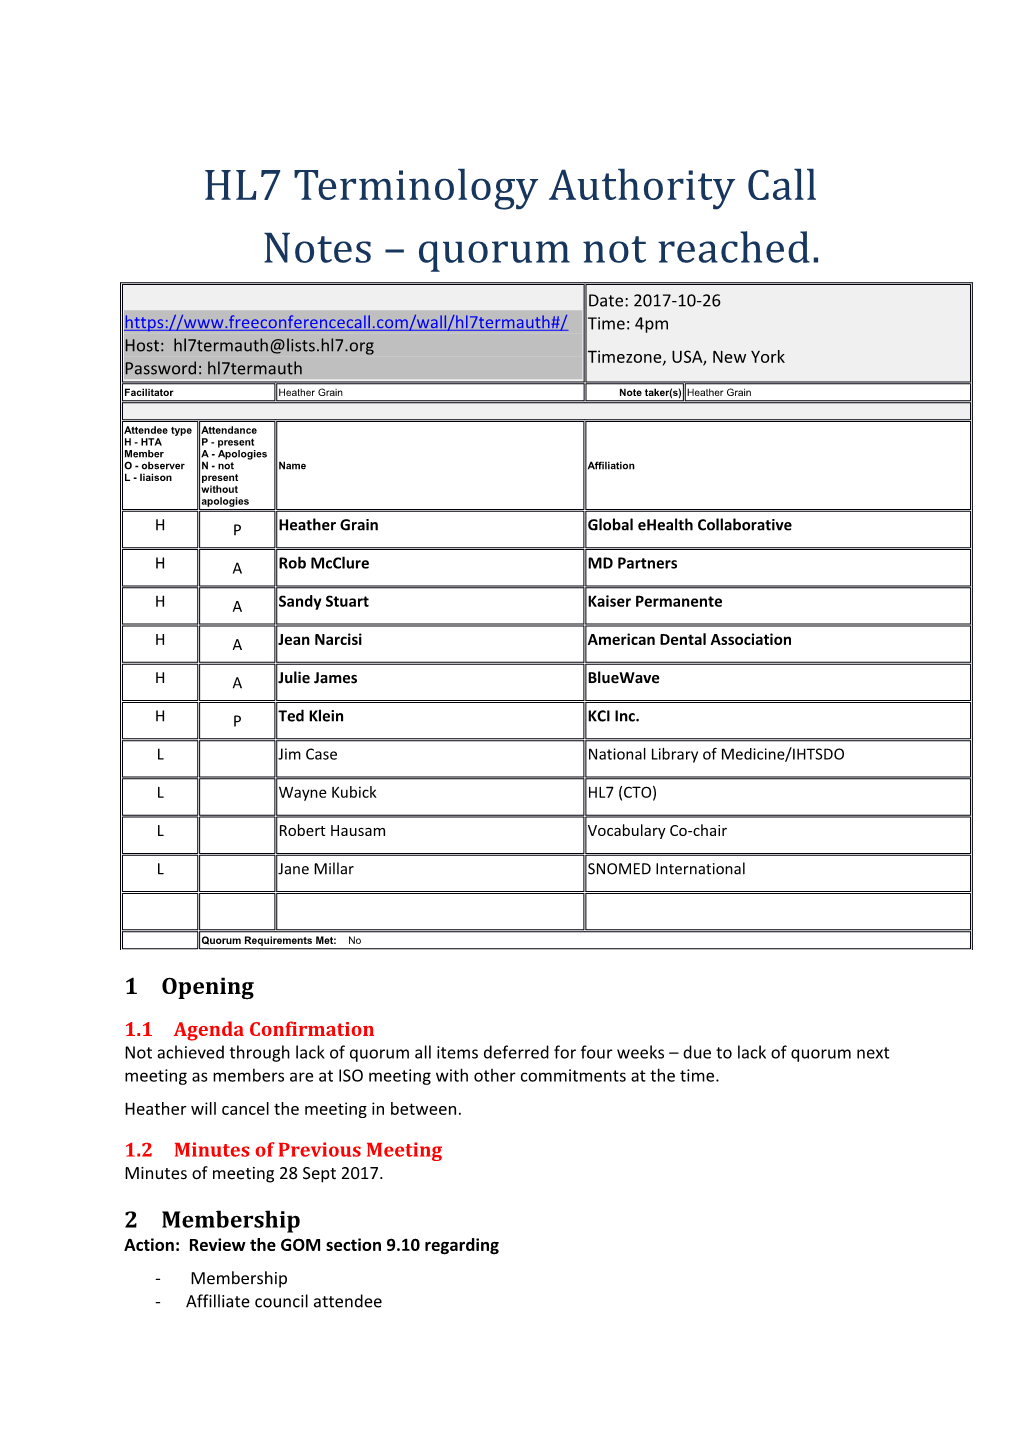 Notes Quorum Not Reached